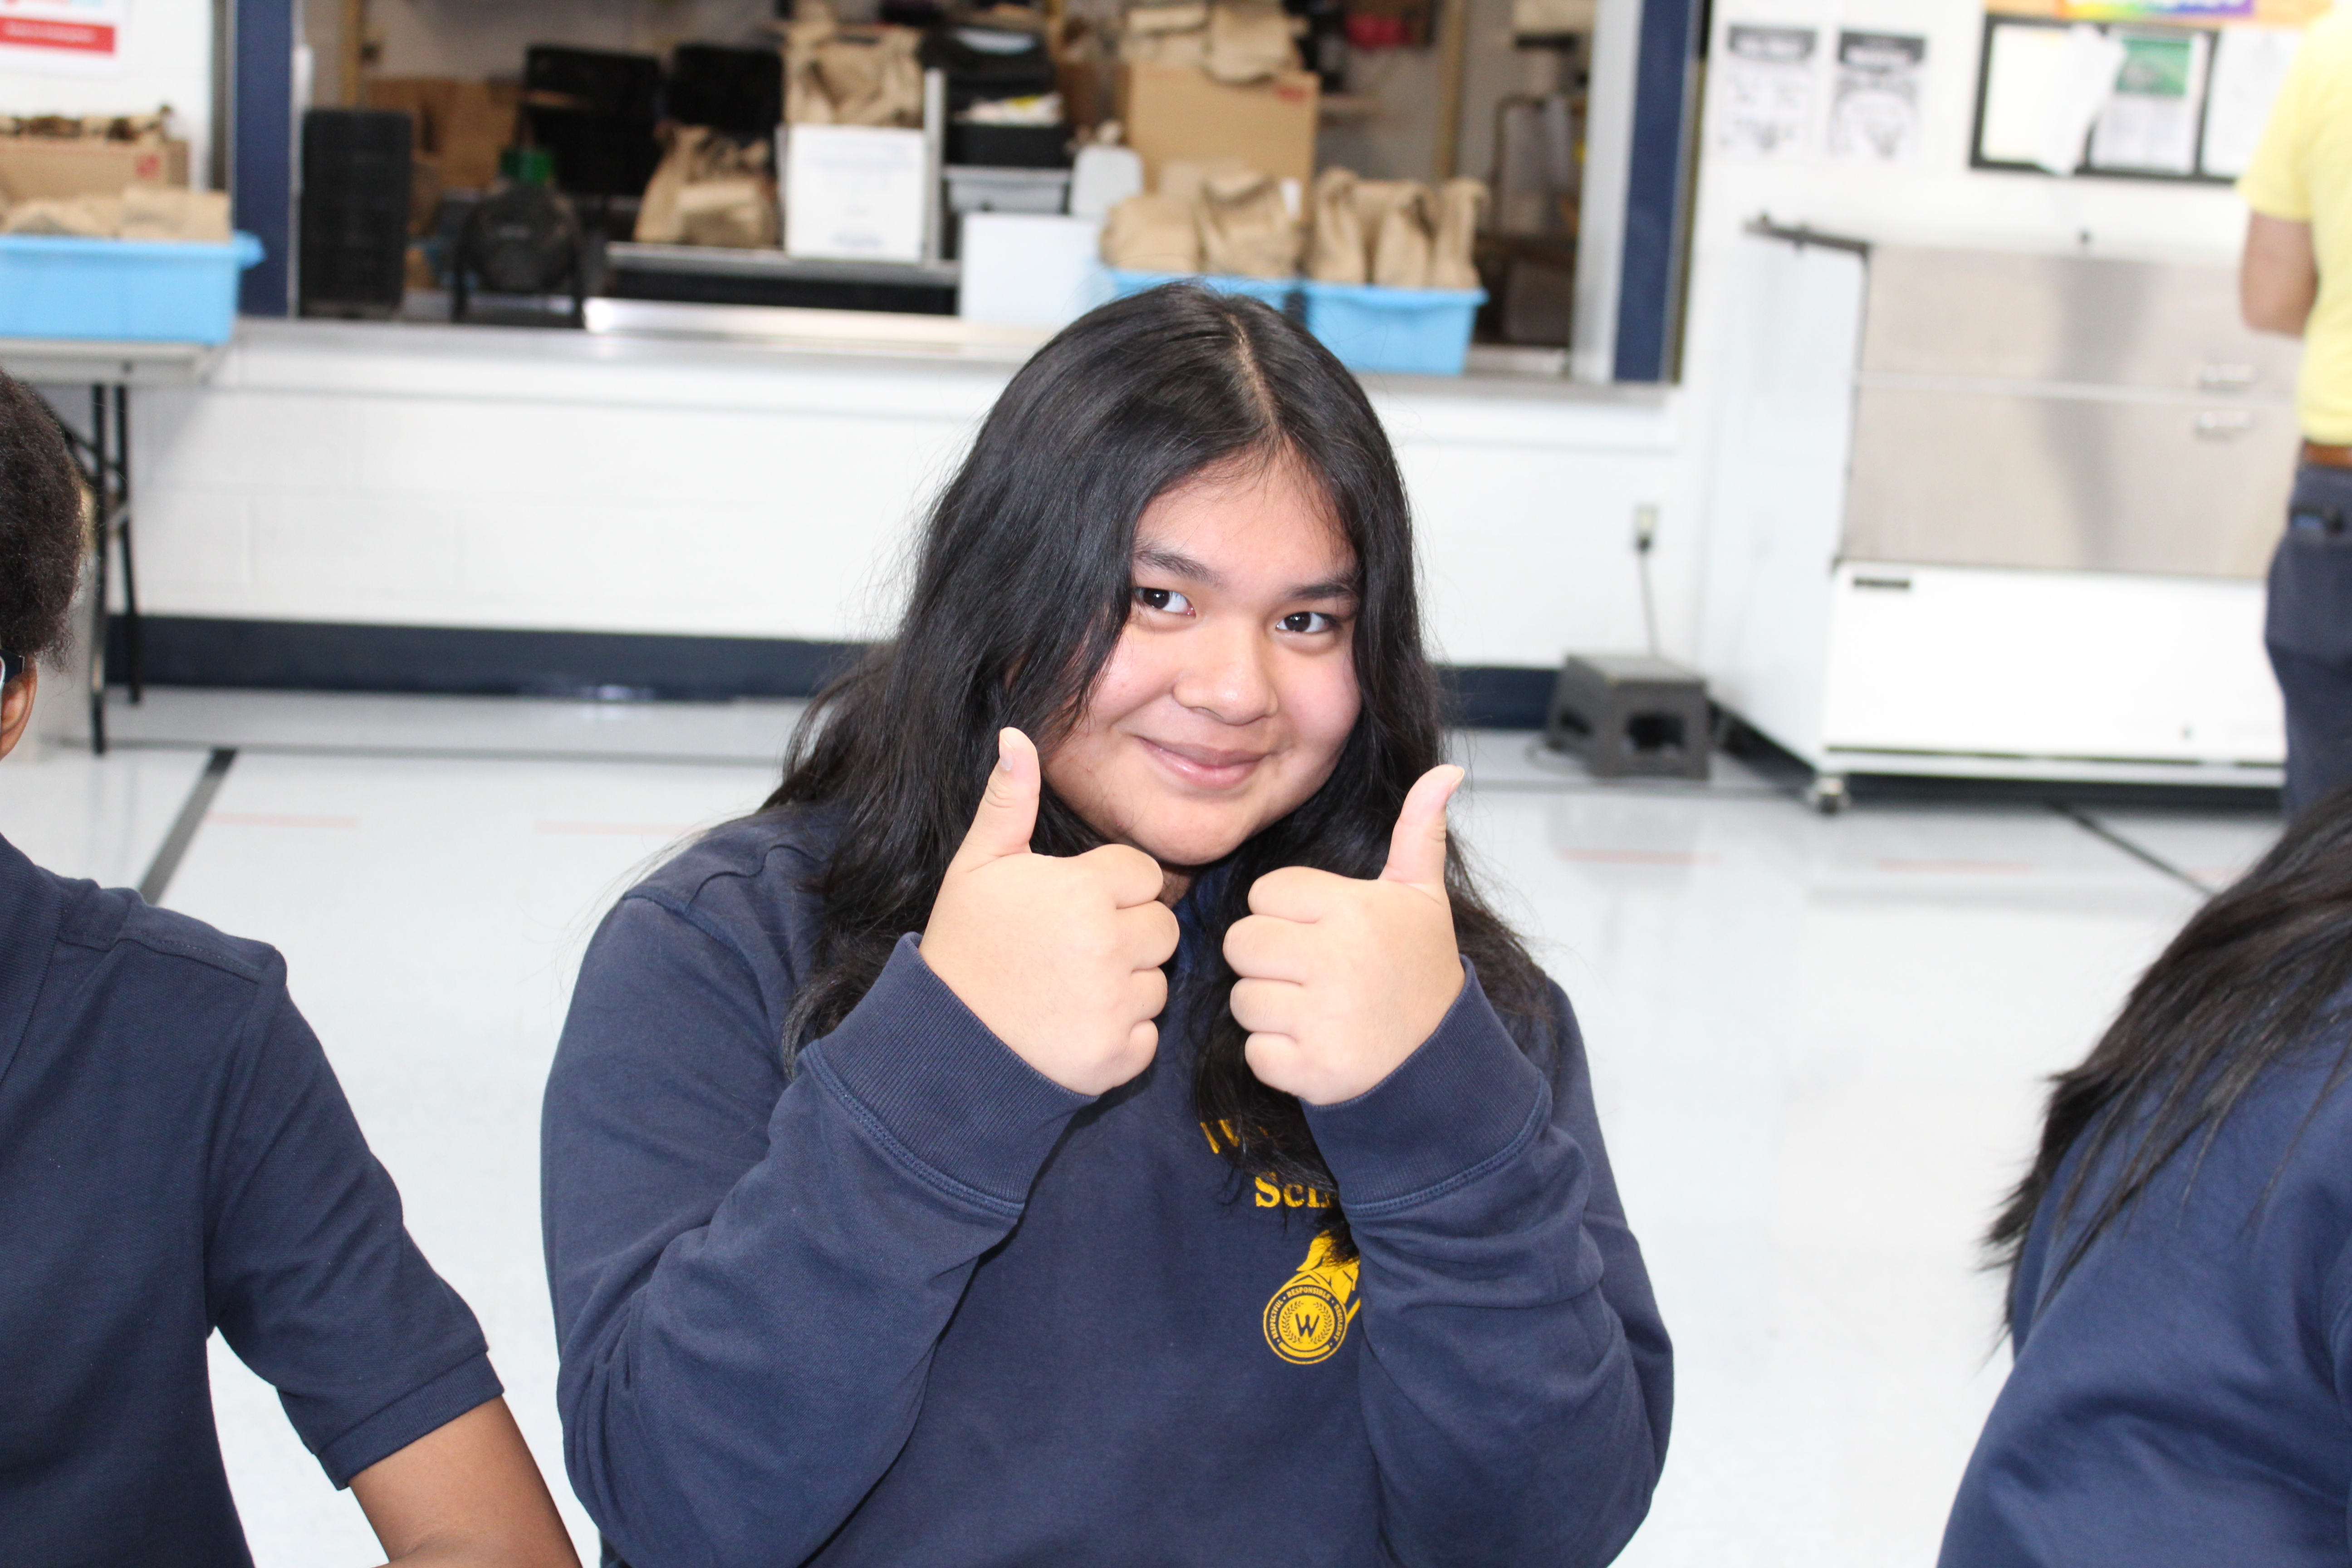 student holding two thumbs up